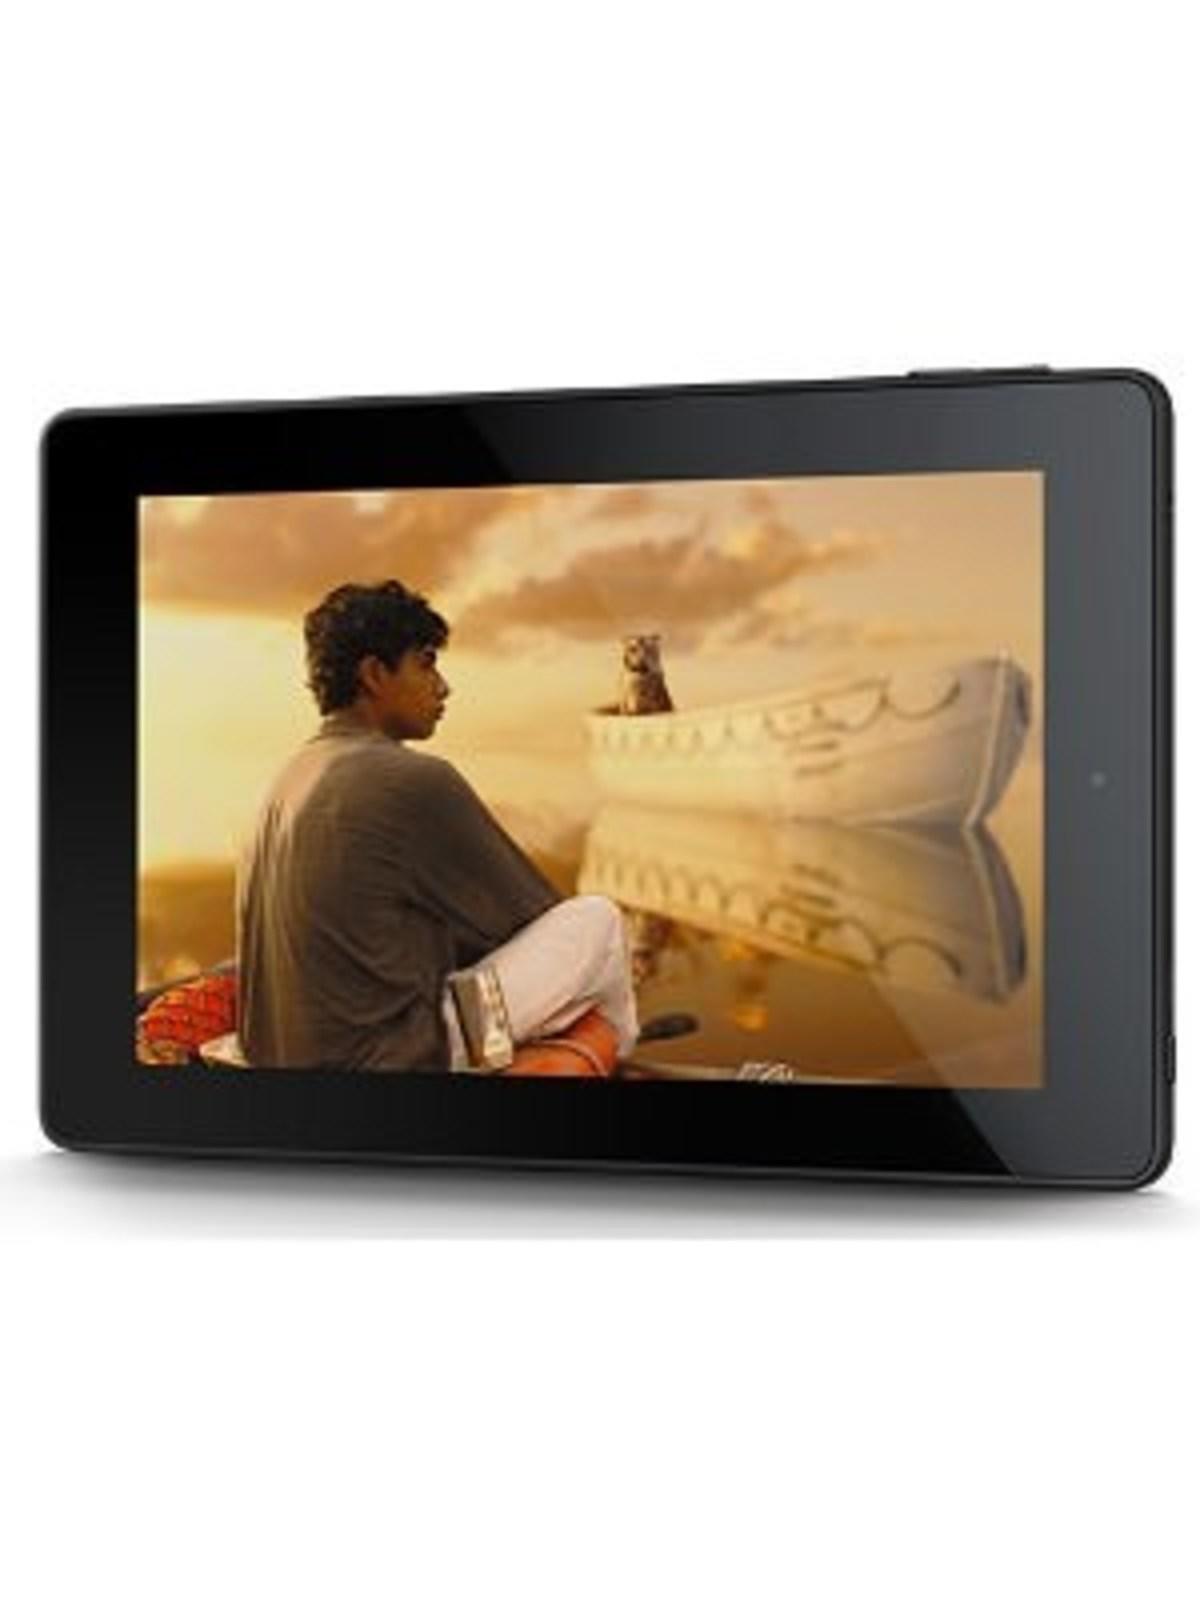 8 GB Kindle Fire HD 7 HD Display Previous Generation - 3rd Wi-Fi Includes Special Offers 